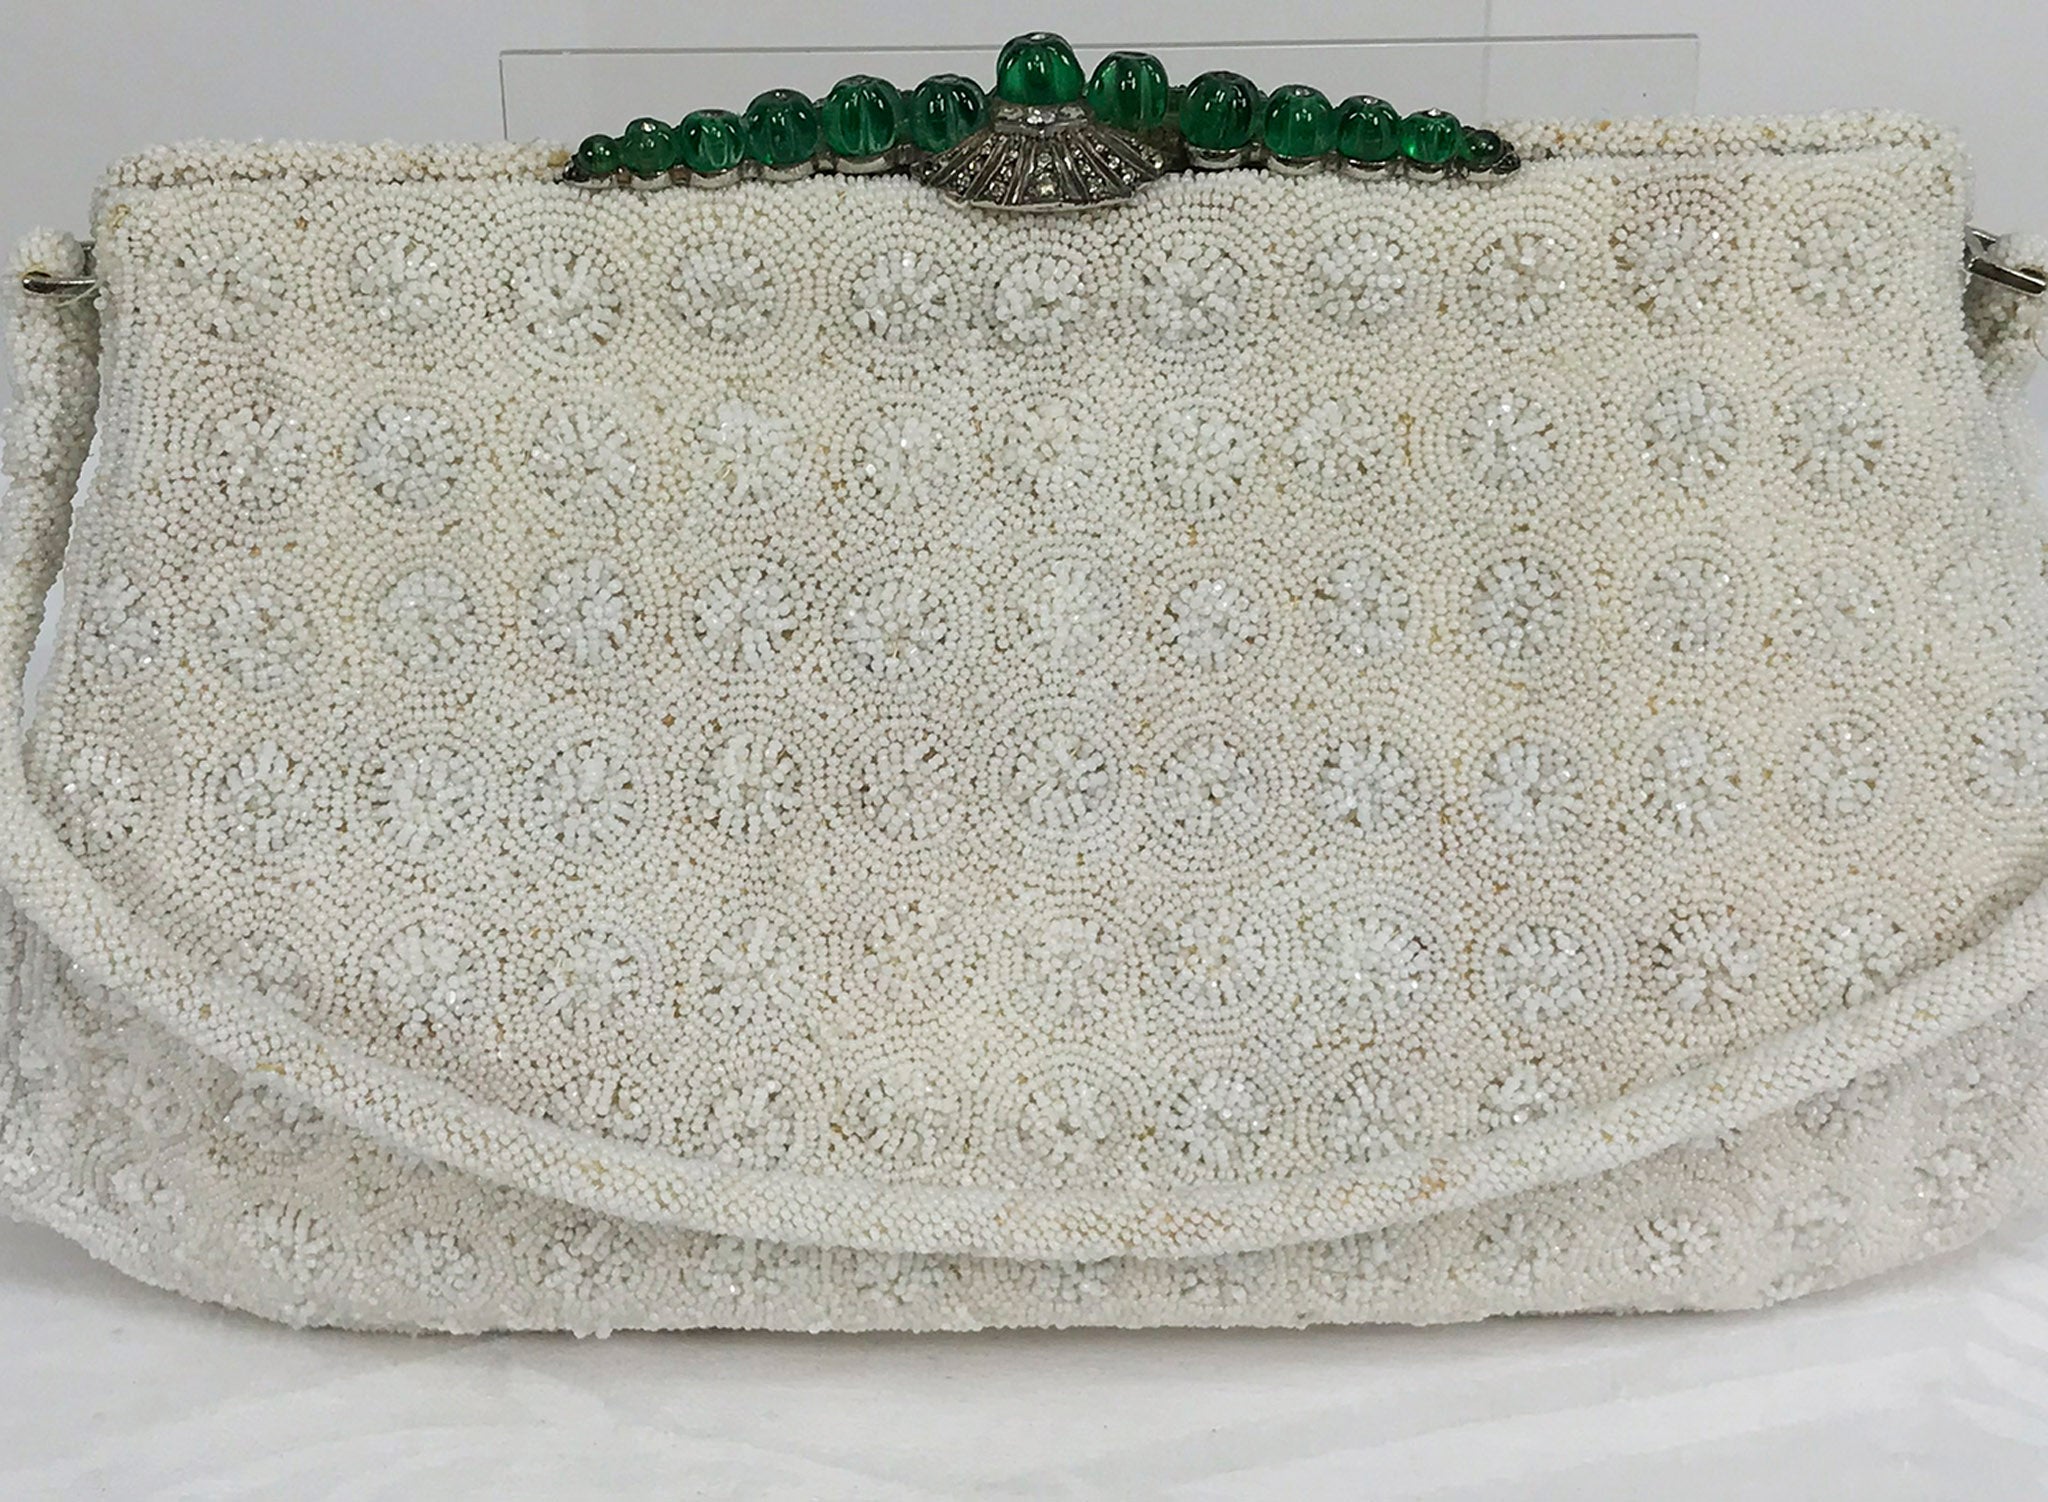 Beaded Occasion Bag